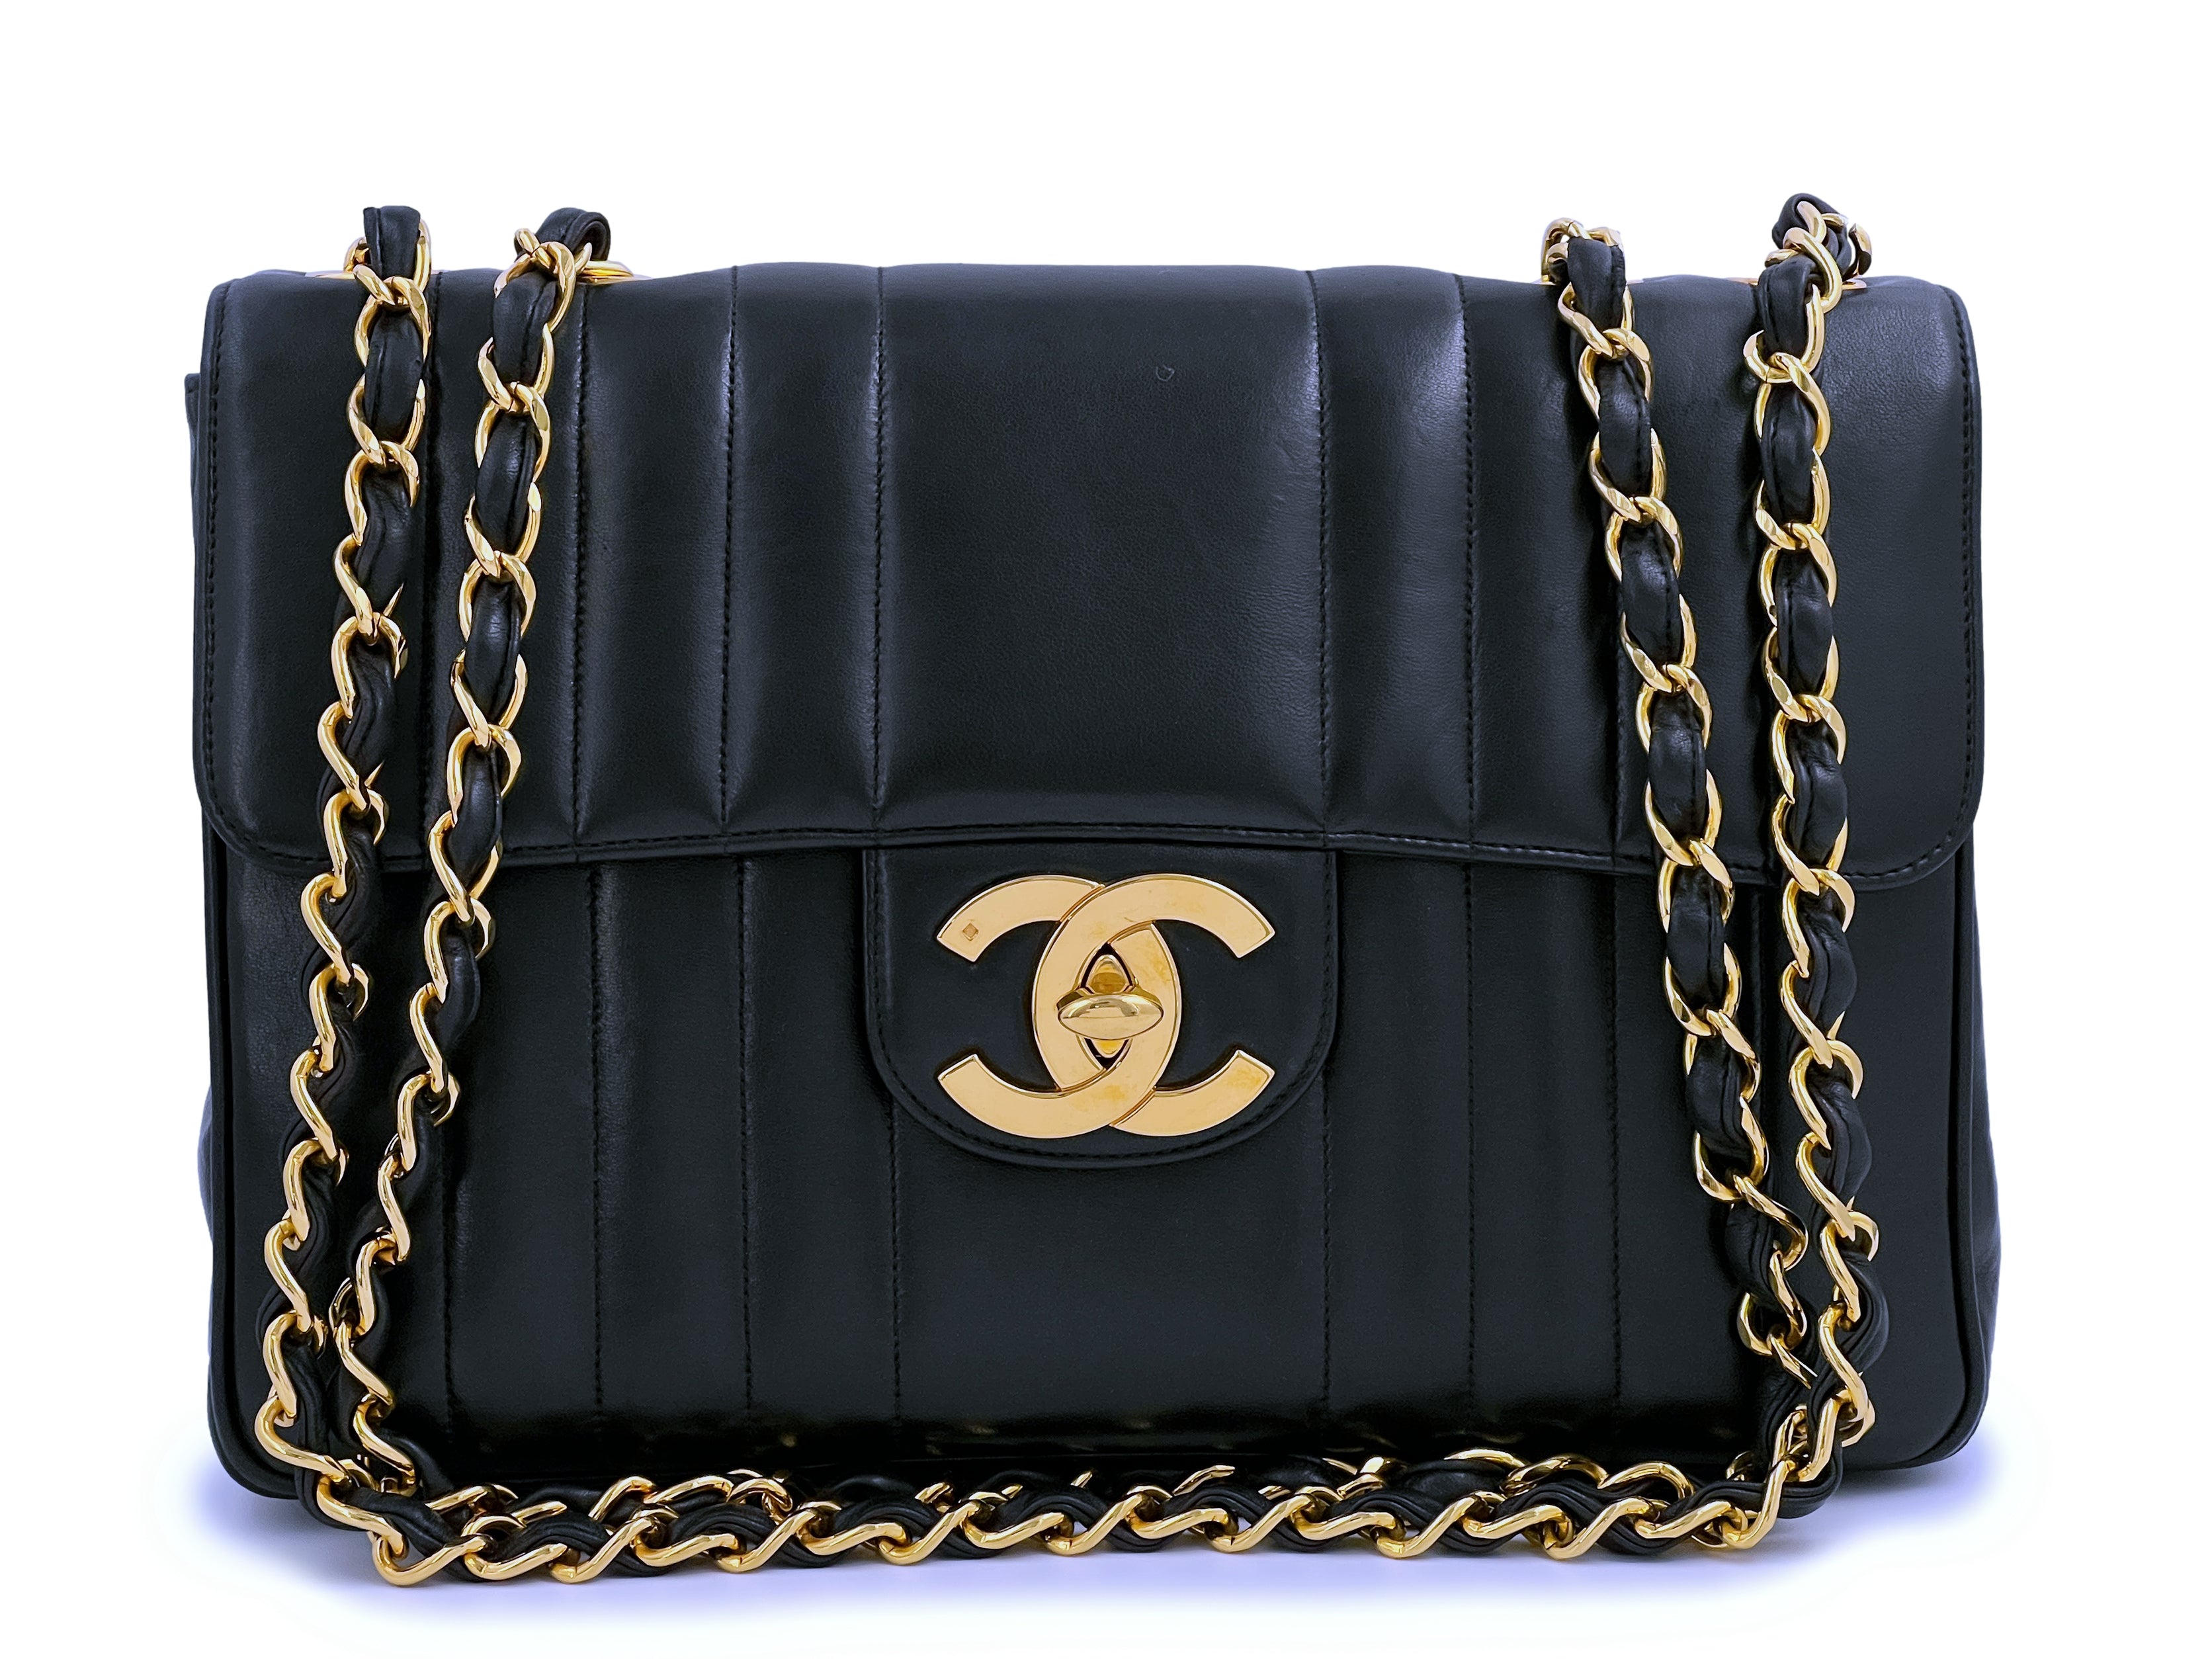 Chanel Mademoiselle Flap  Buying at Paris Airport  YouTube